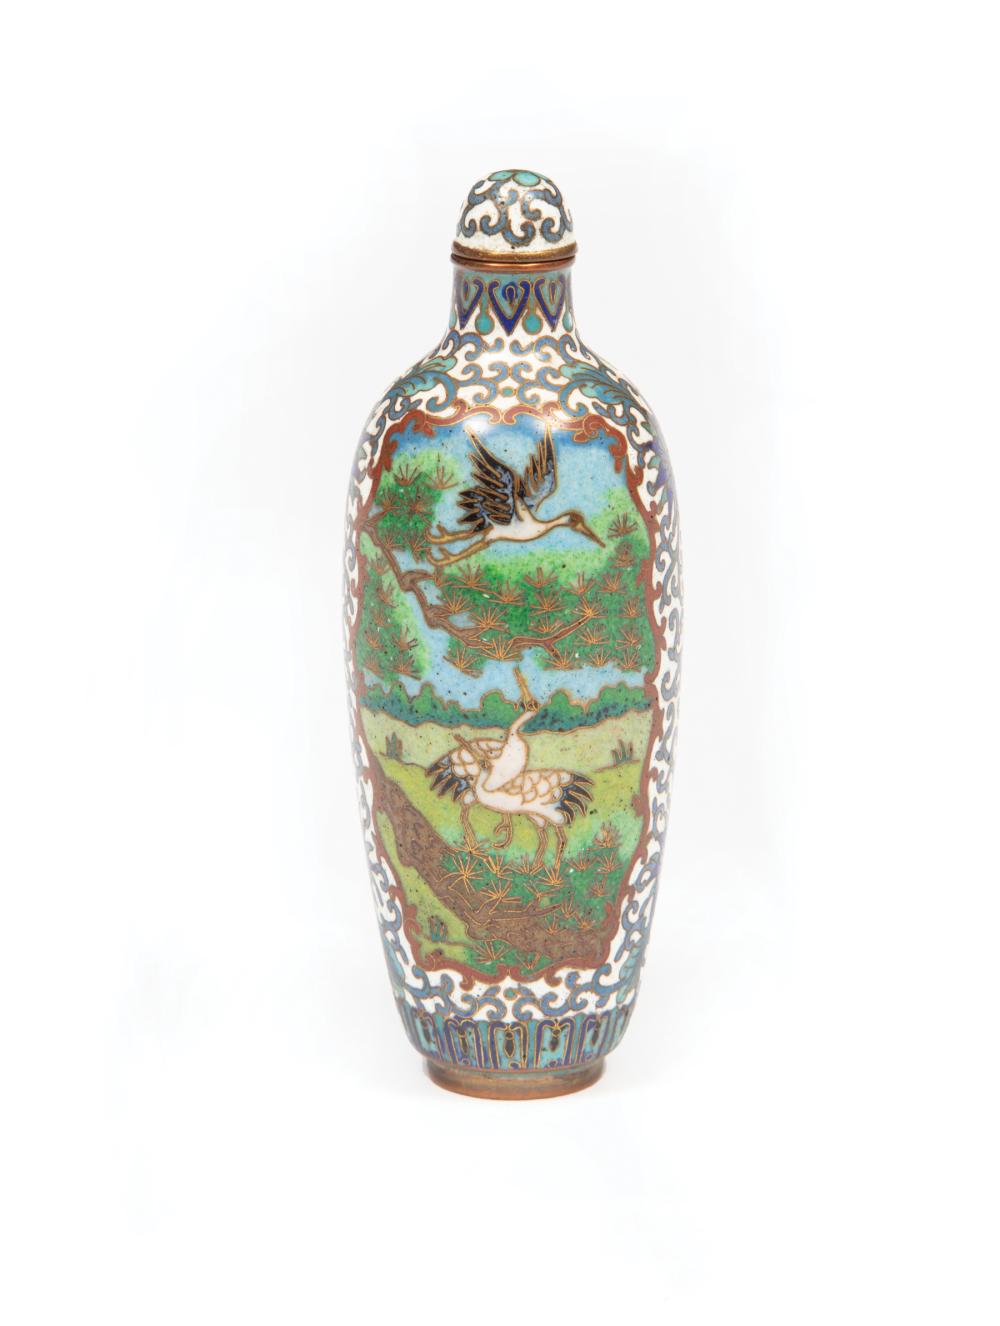 CHINESE CLOISONNE ENAMEL SNUFF